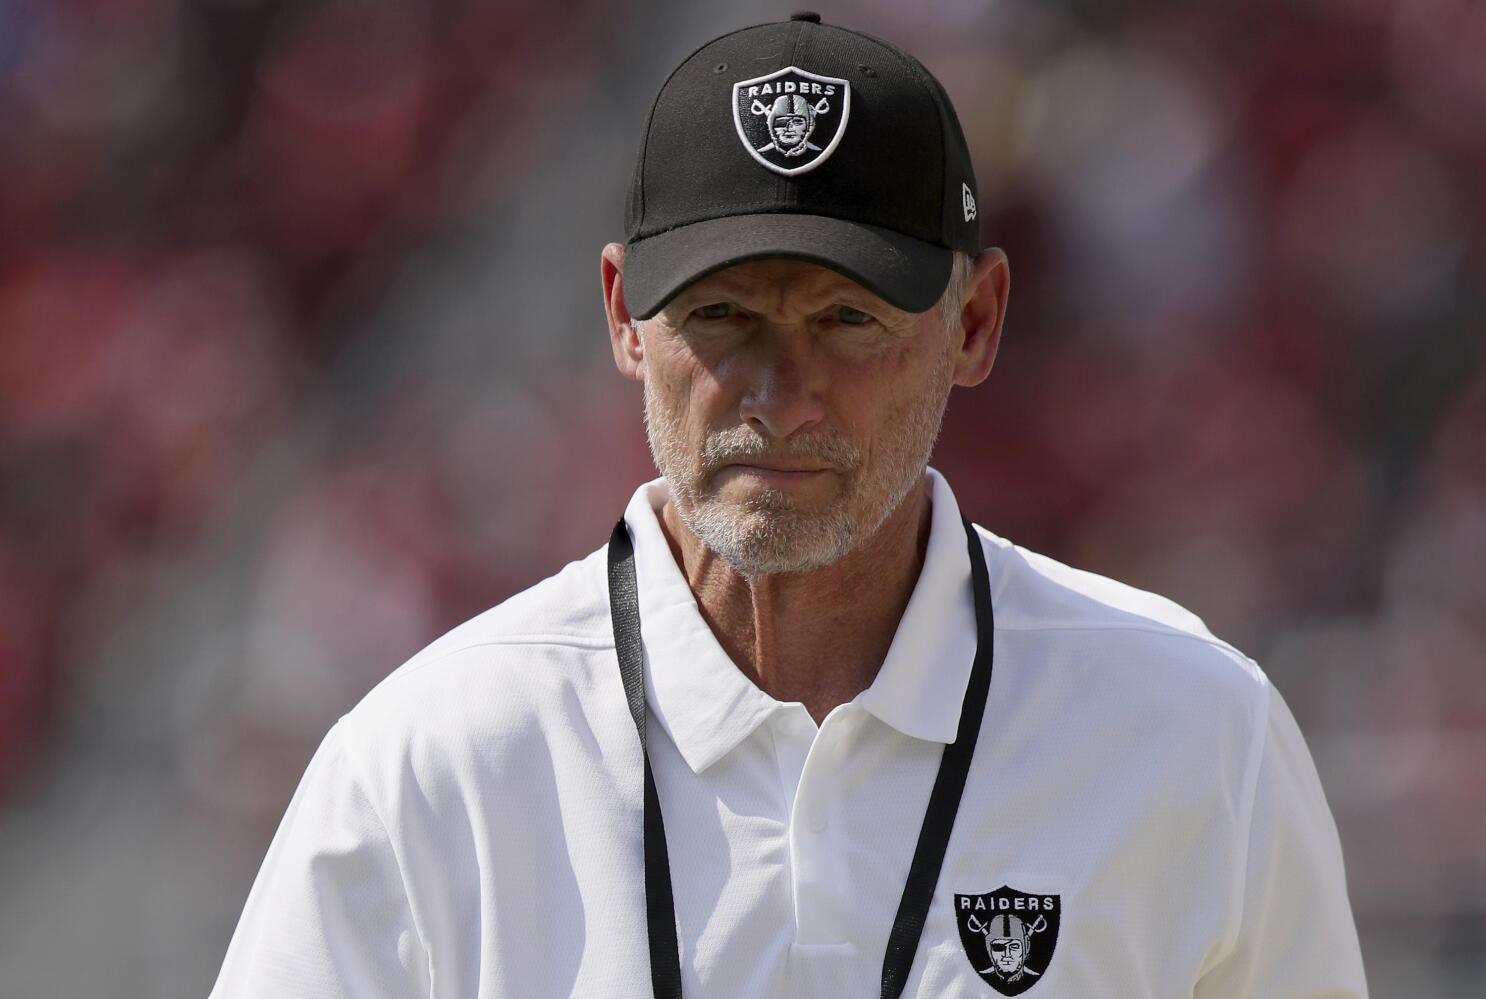 Raiders GM Mike Mayock: 'We need to be a playoff team'